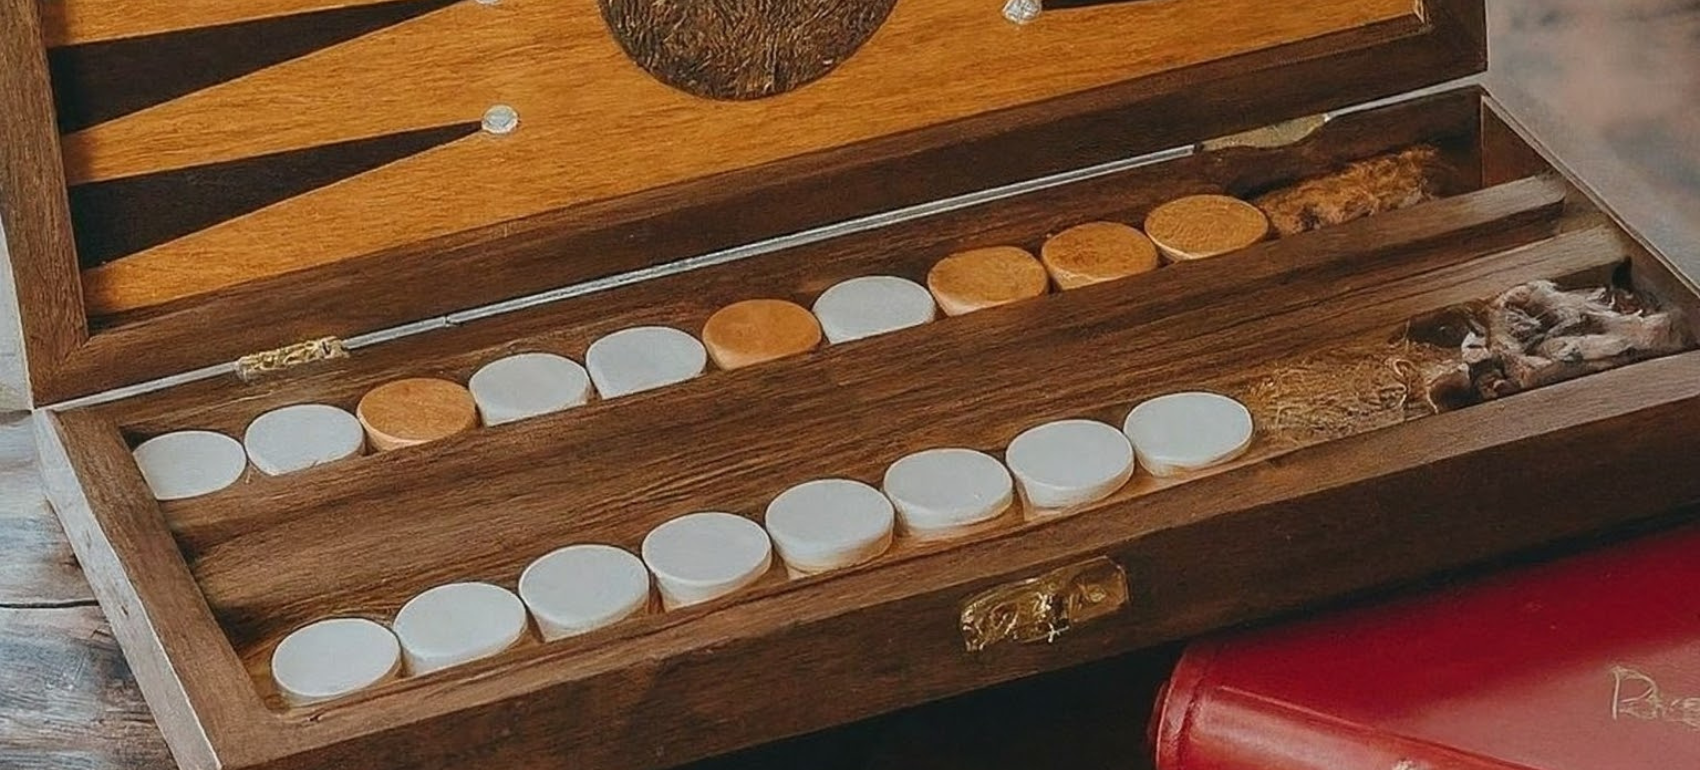 5 Surprising Backgammon Facts That Will Change the Way You Play